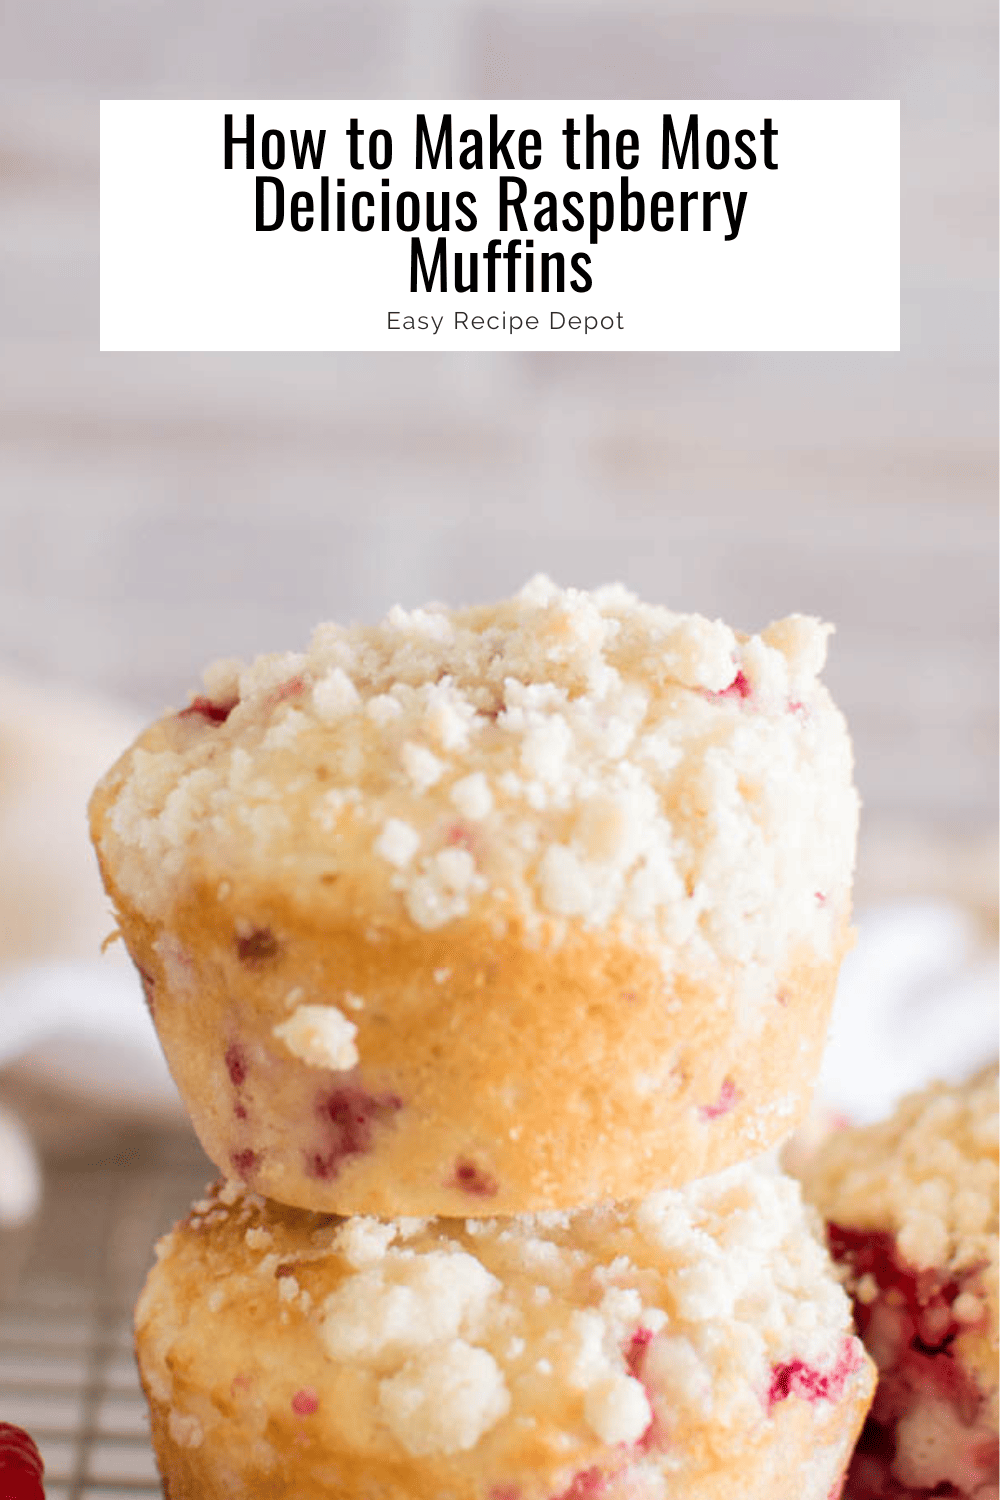 Raspberry muffins ready for breakfast and stacked on top of each other